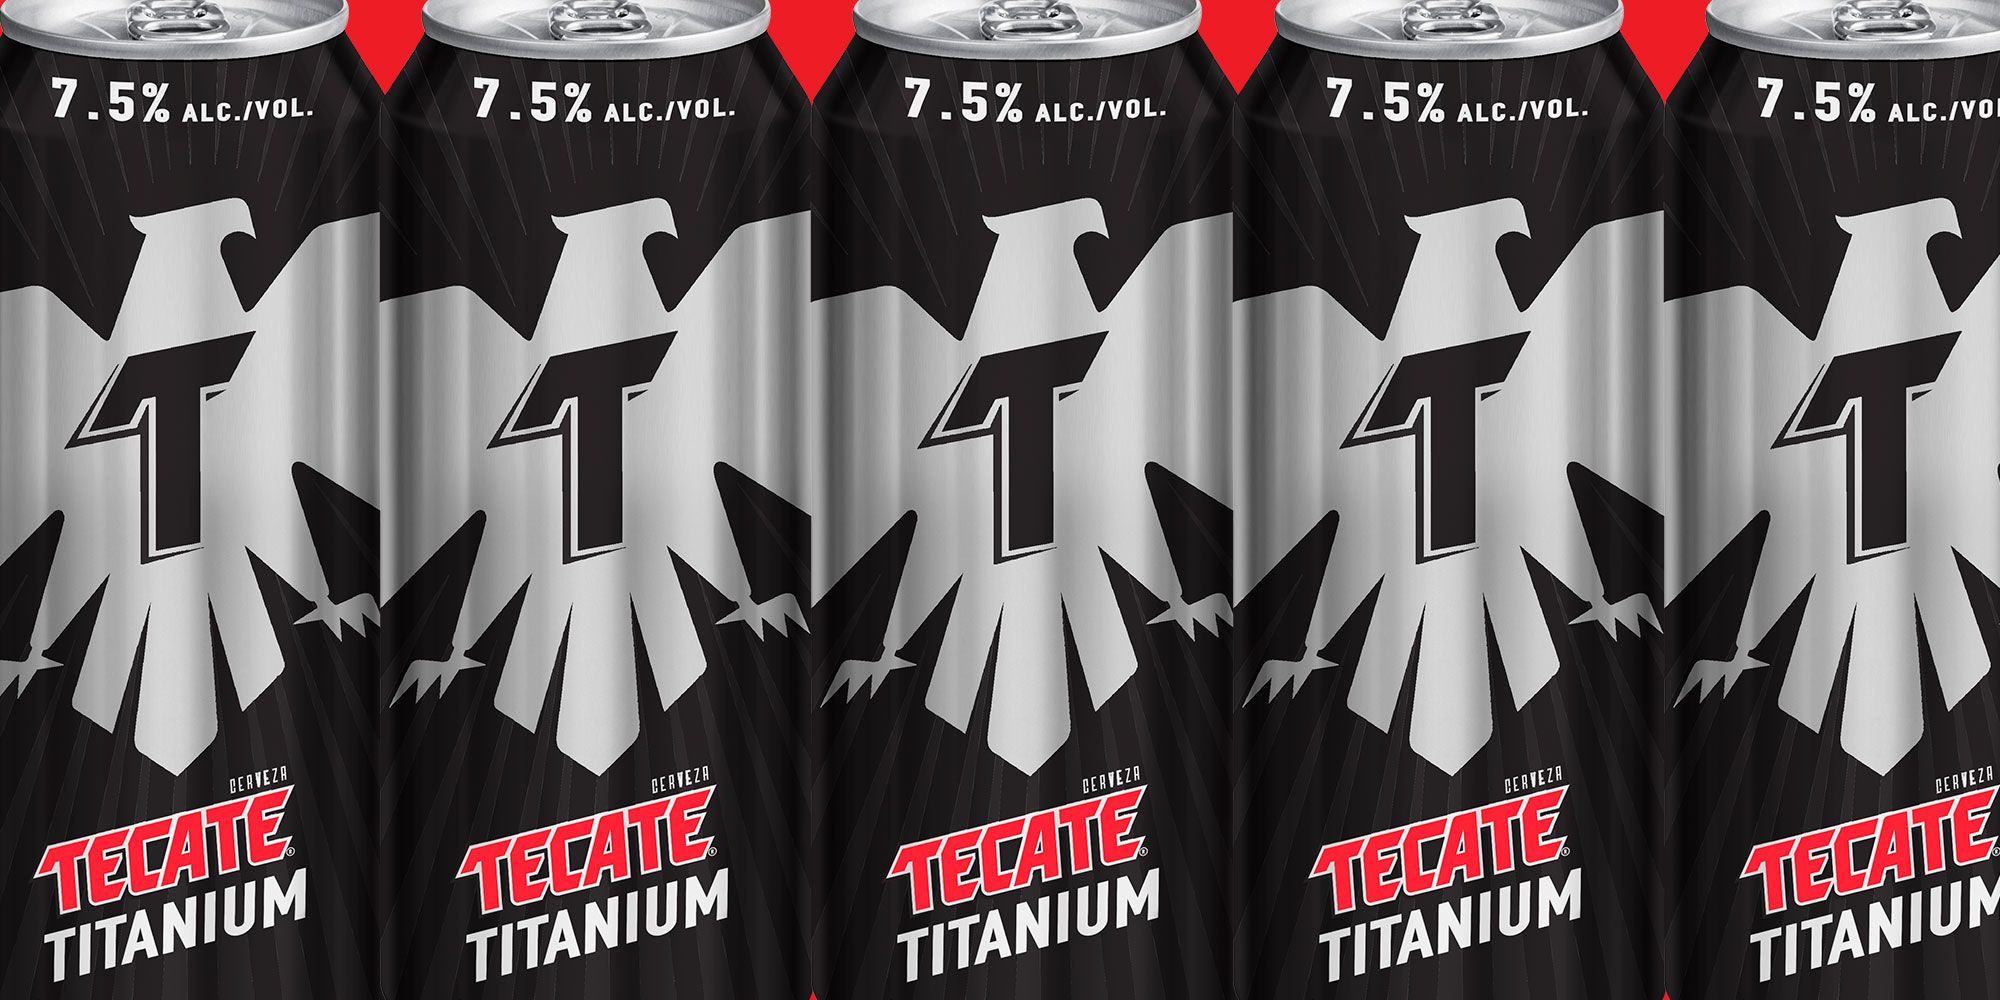 Tecate Titanium Is 24 Ounces And Has